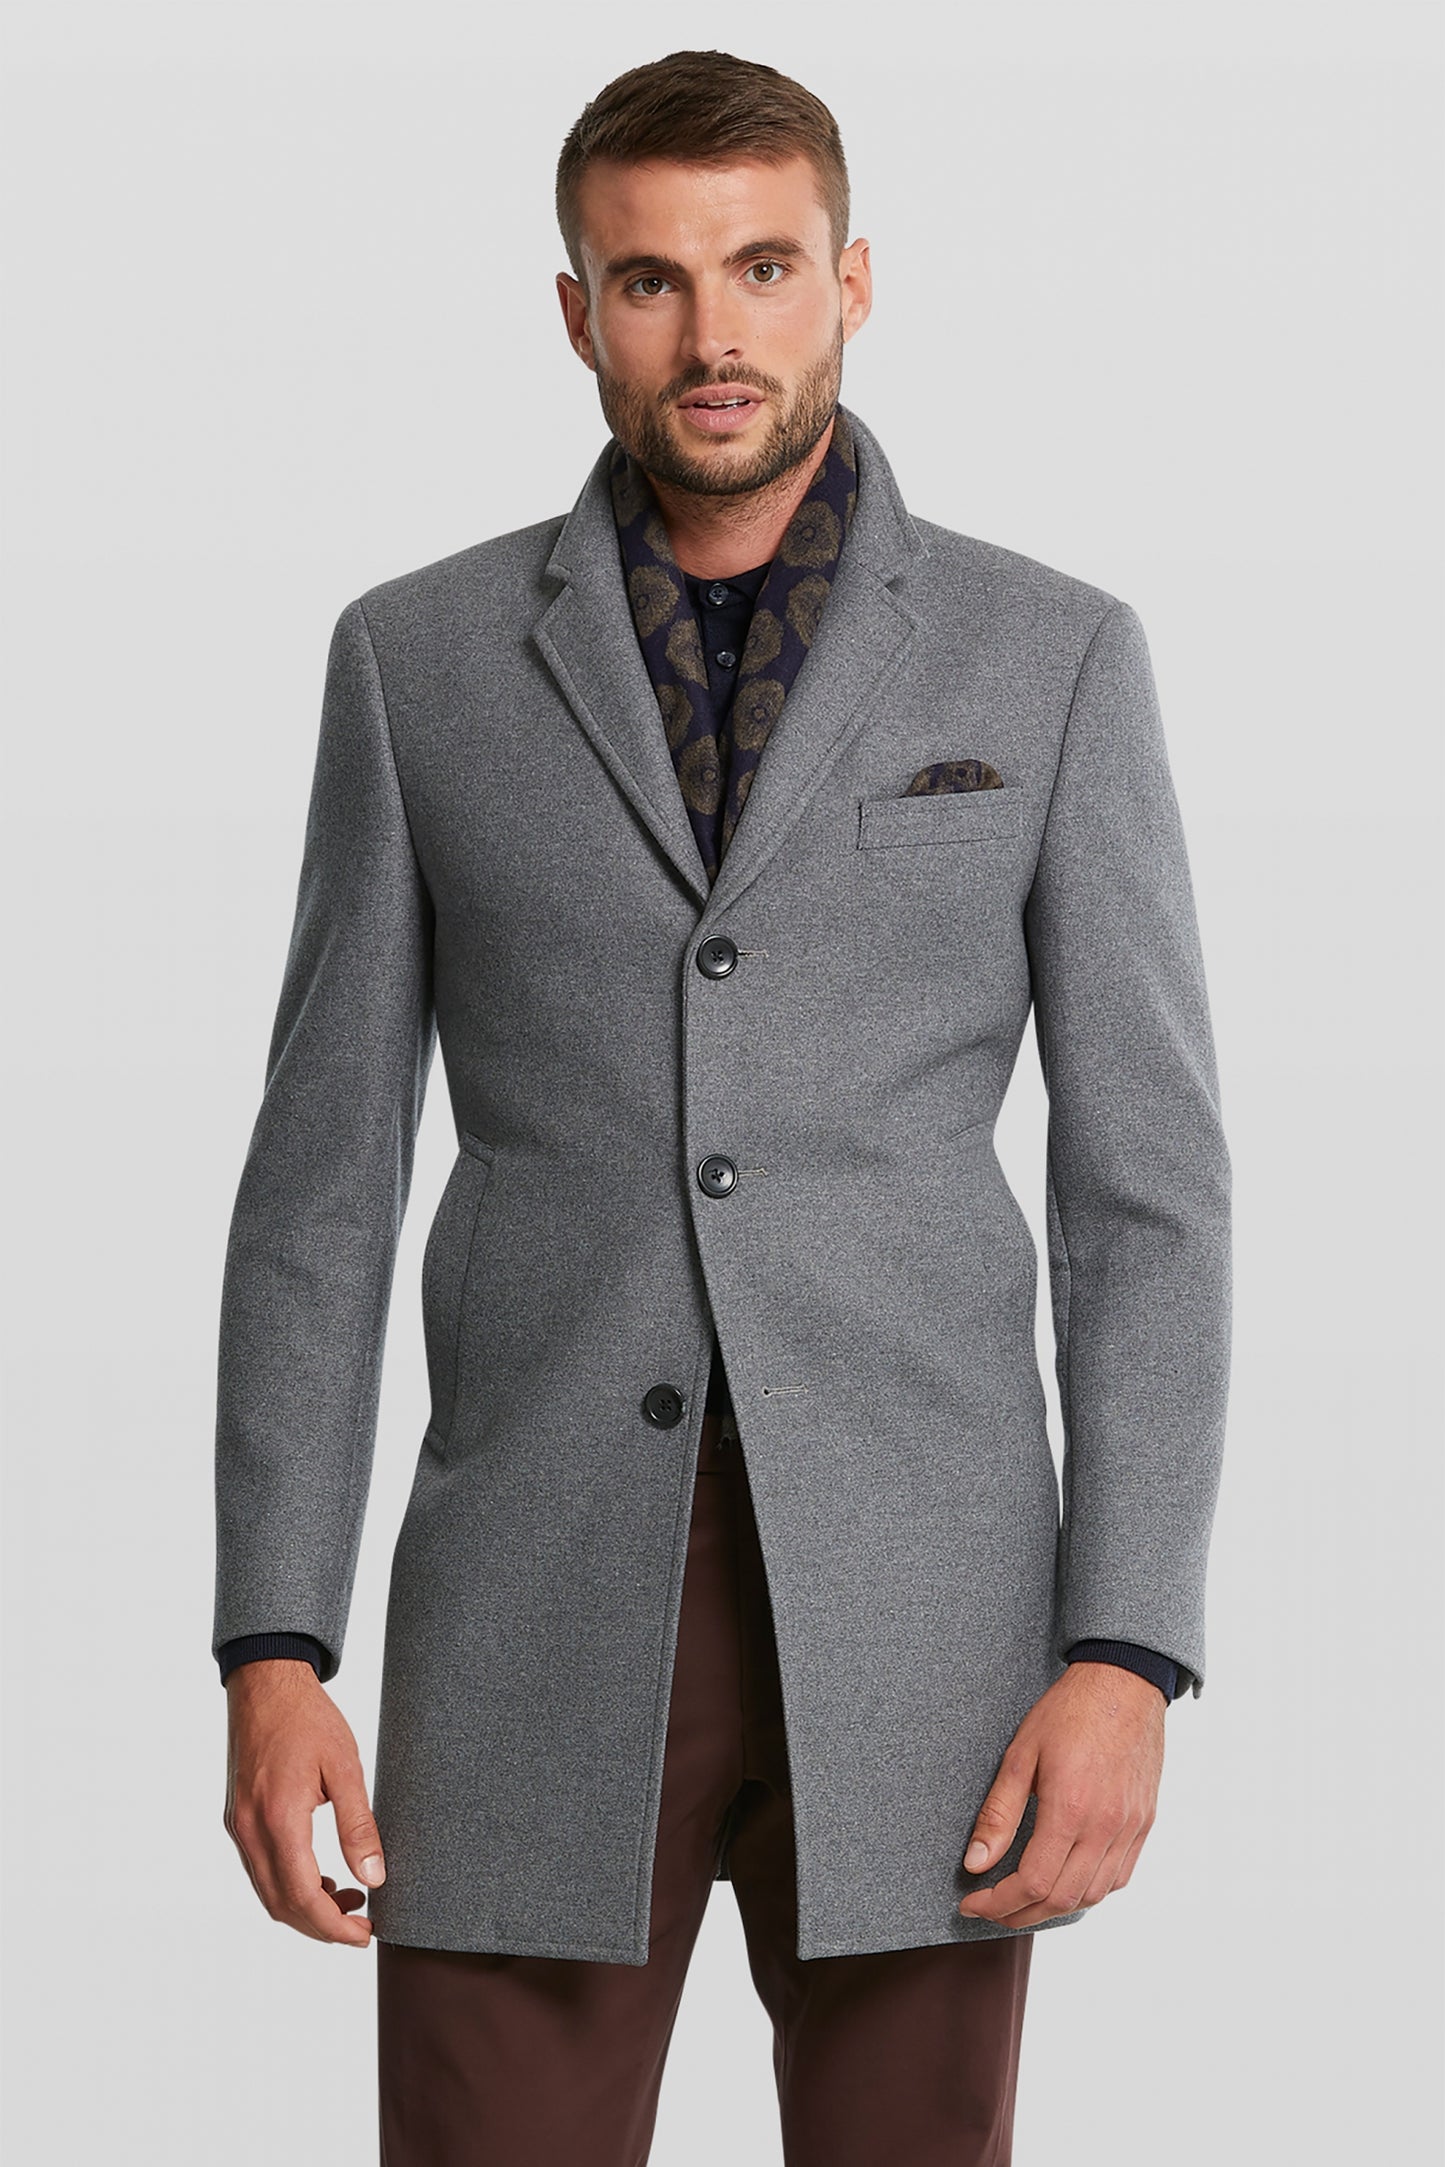 Dinal Blue Grey Wool Coat from Van Gils Fashion at StylishGuy Boutique Dublin